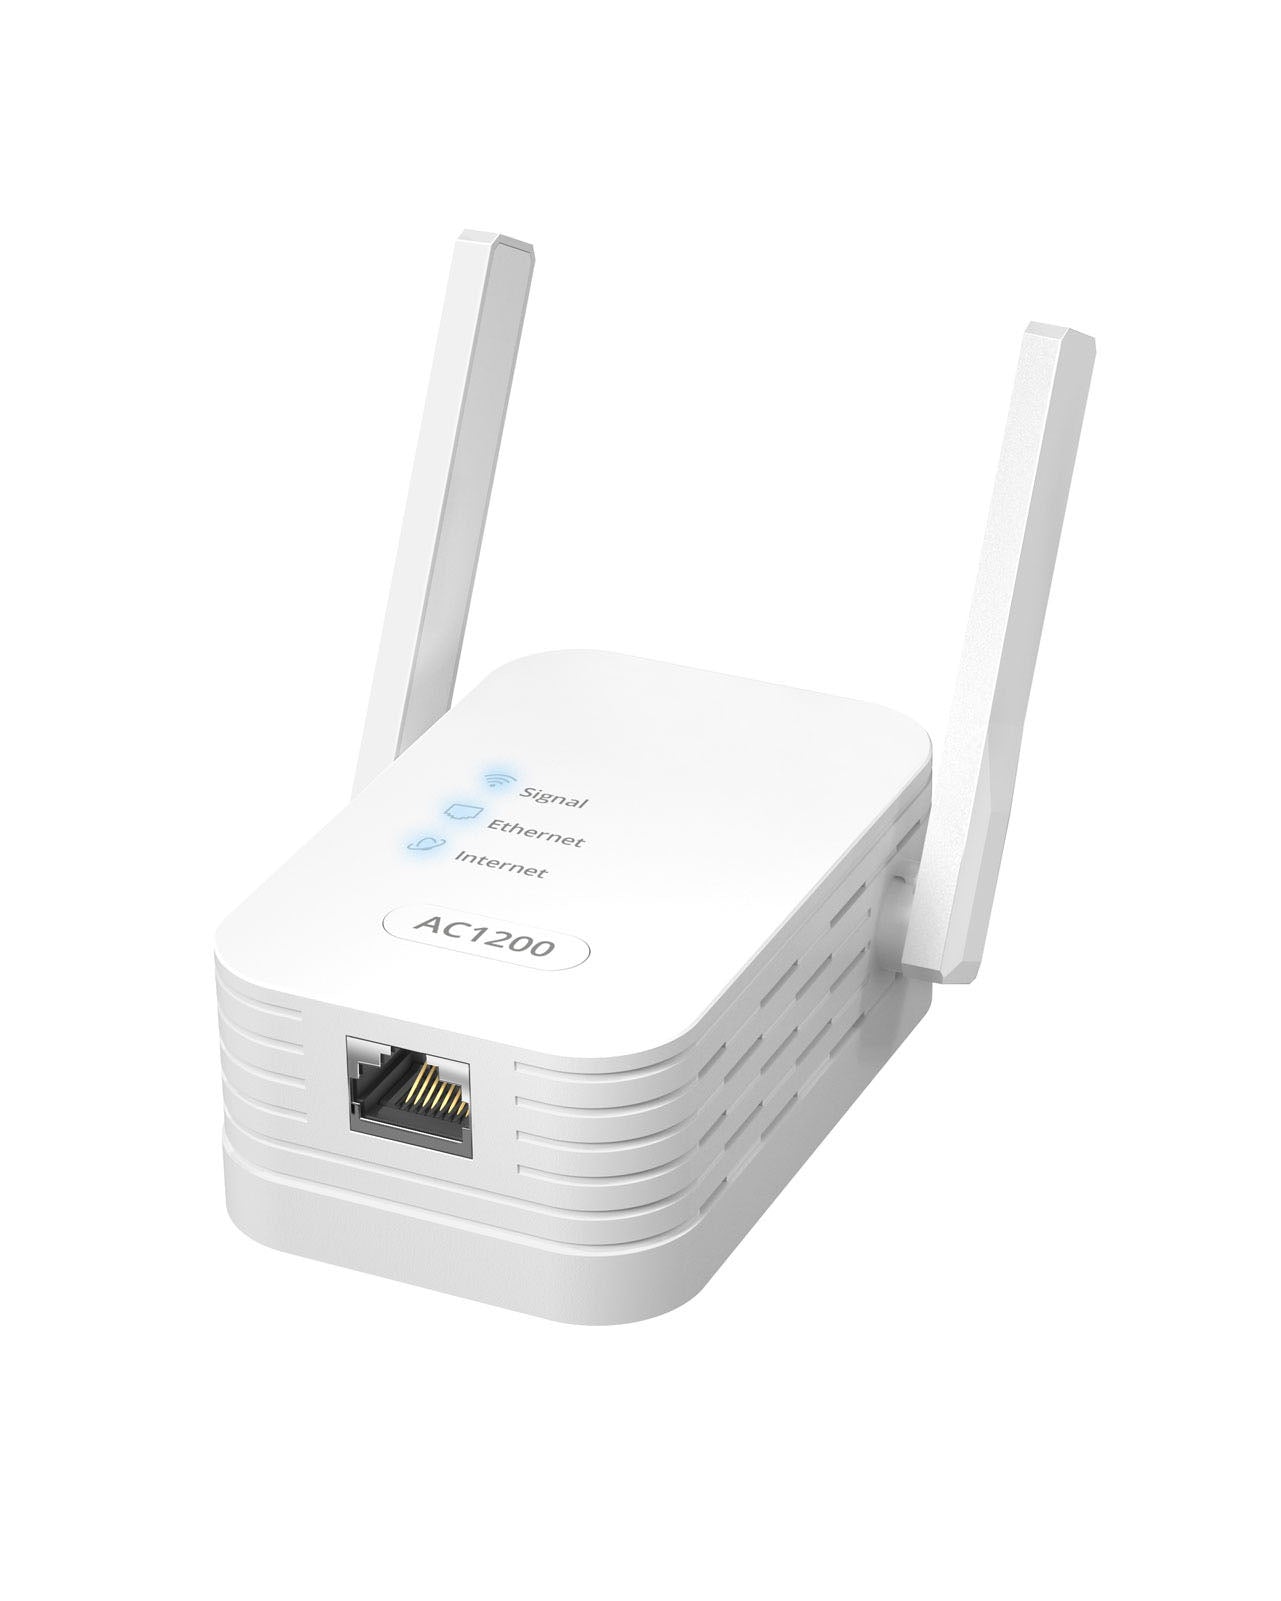 ioGiant 1200Mbps WiFi to Ethernet Adapter